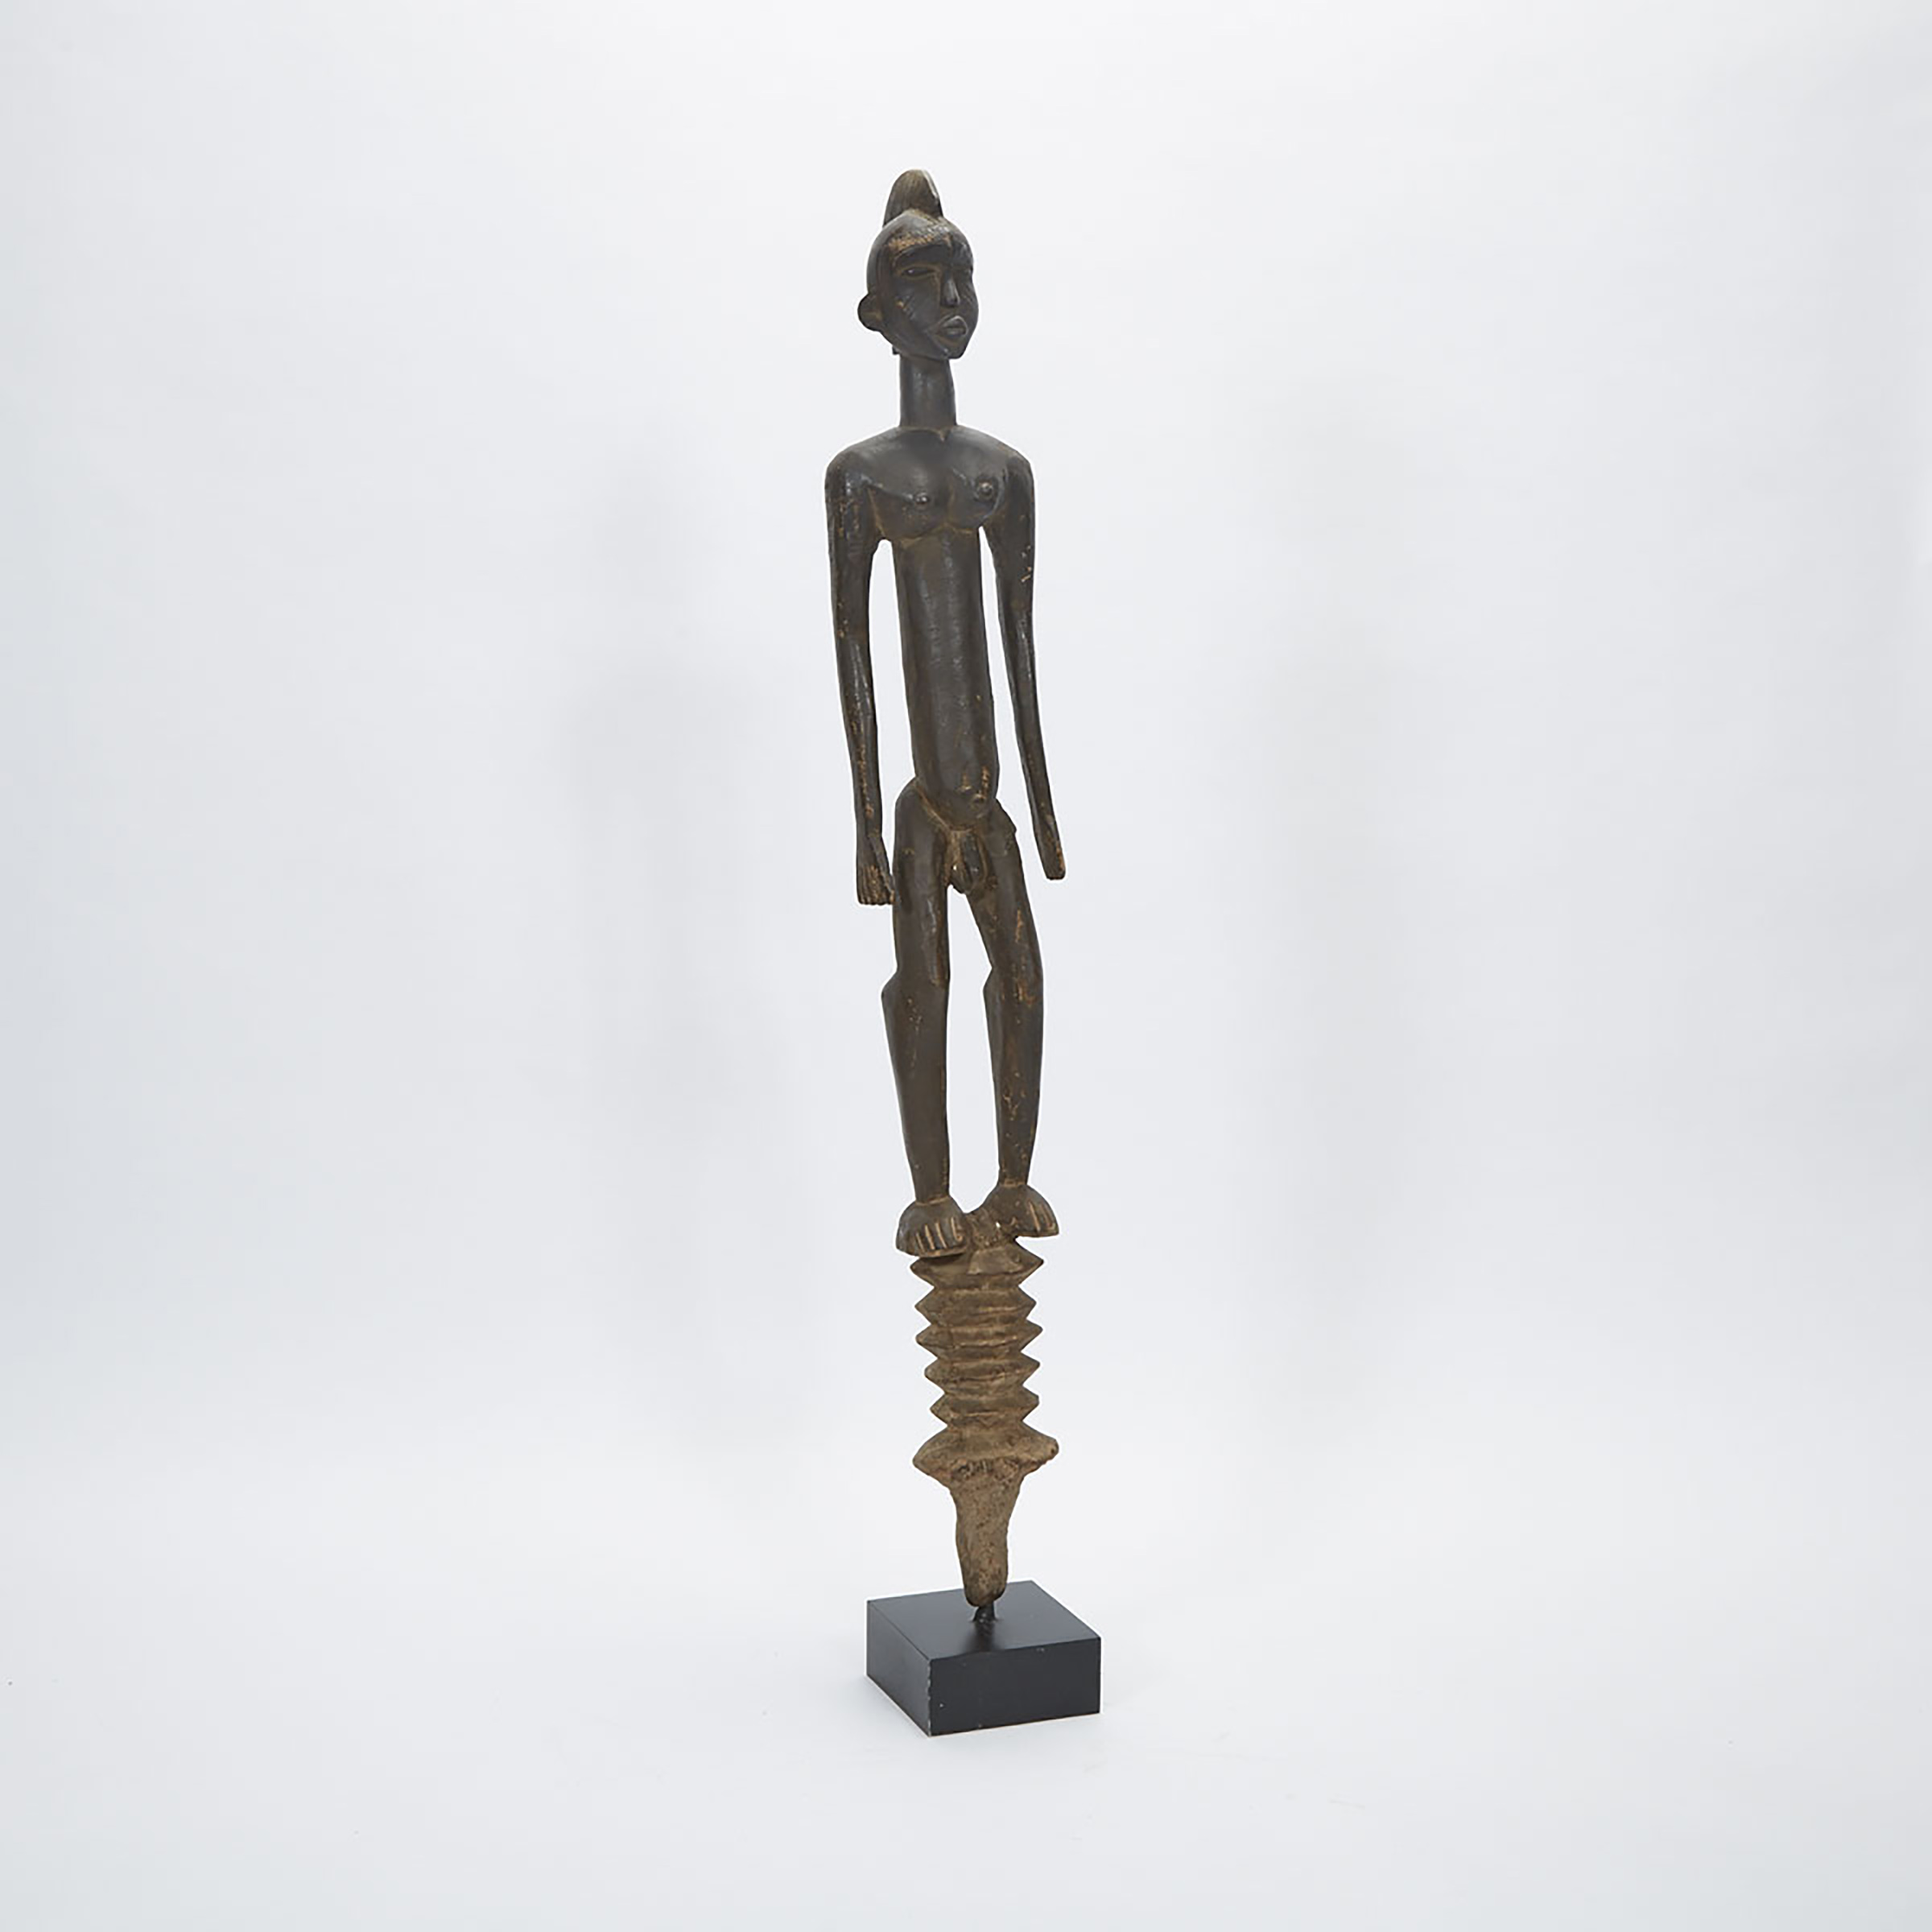 Male Shrine Figure, possibly Senufo or Mossi, West Africa